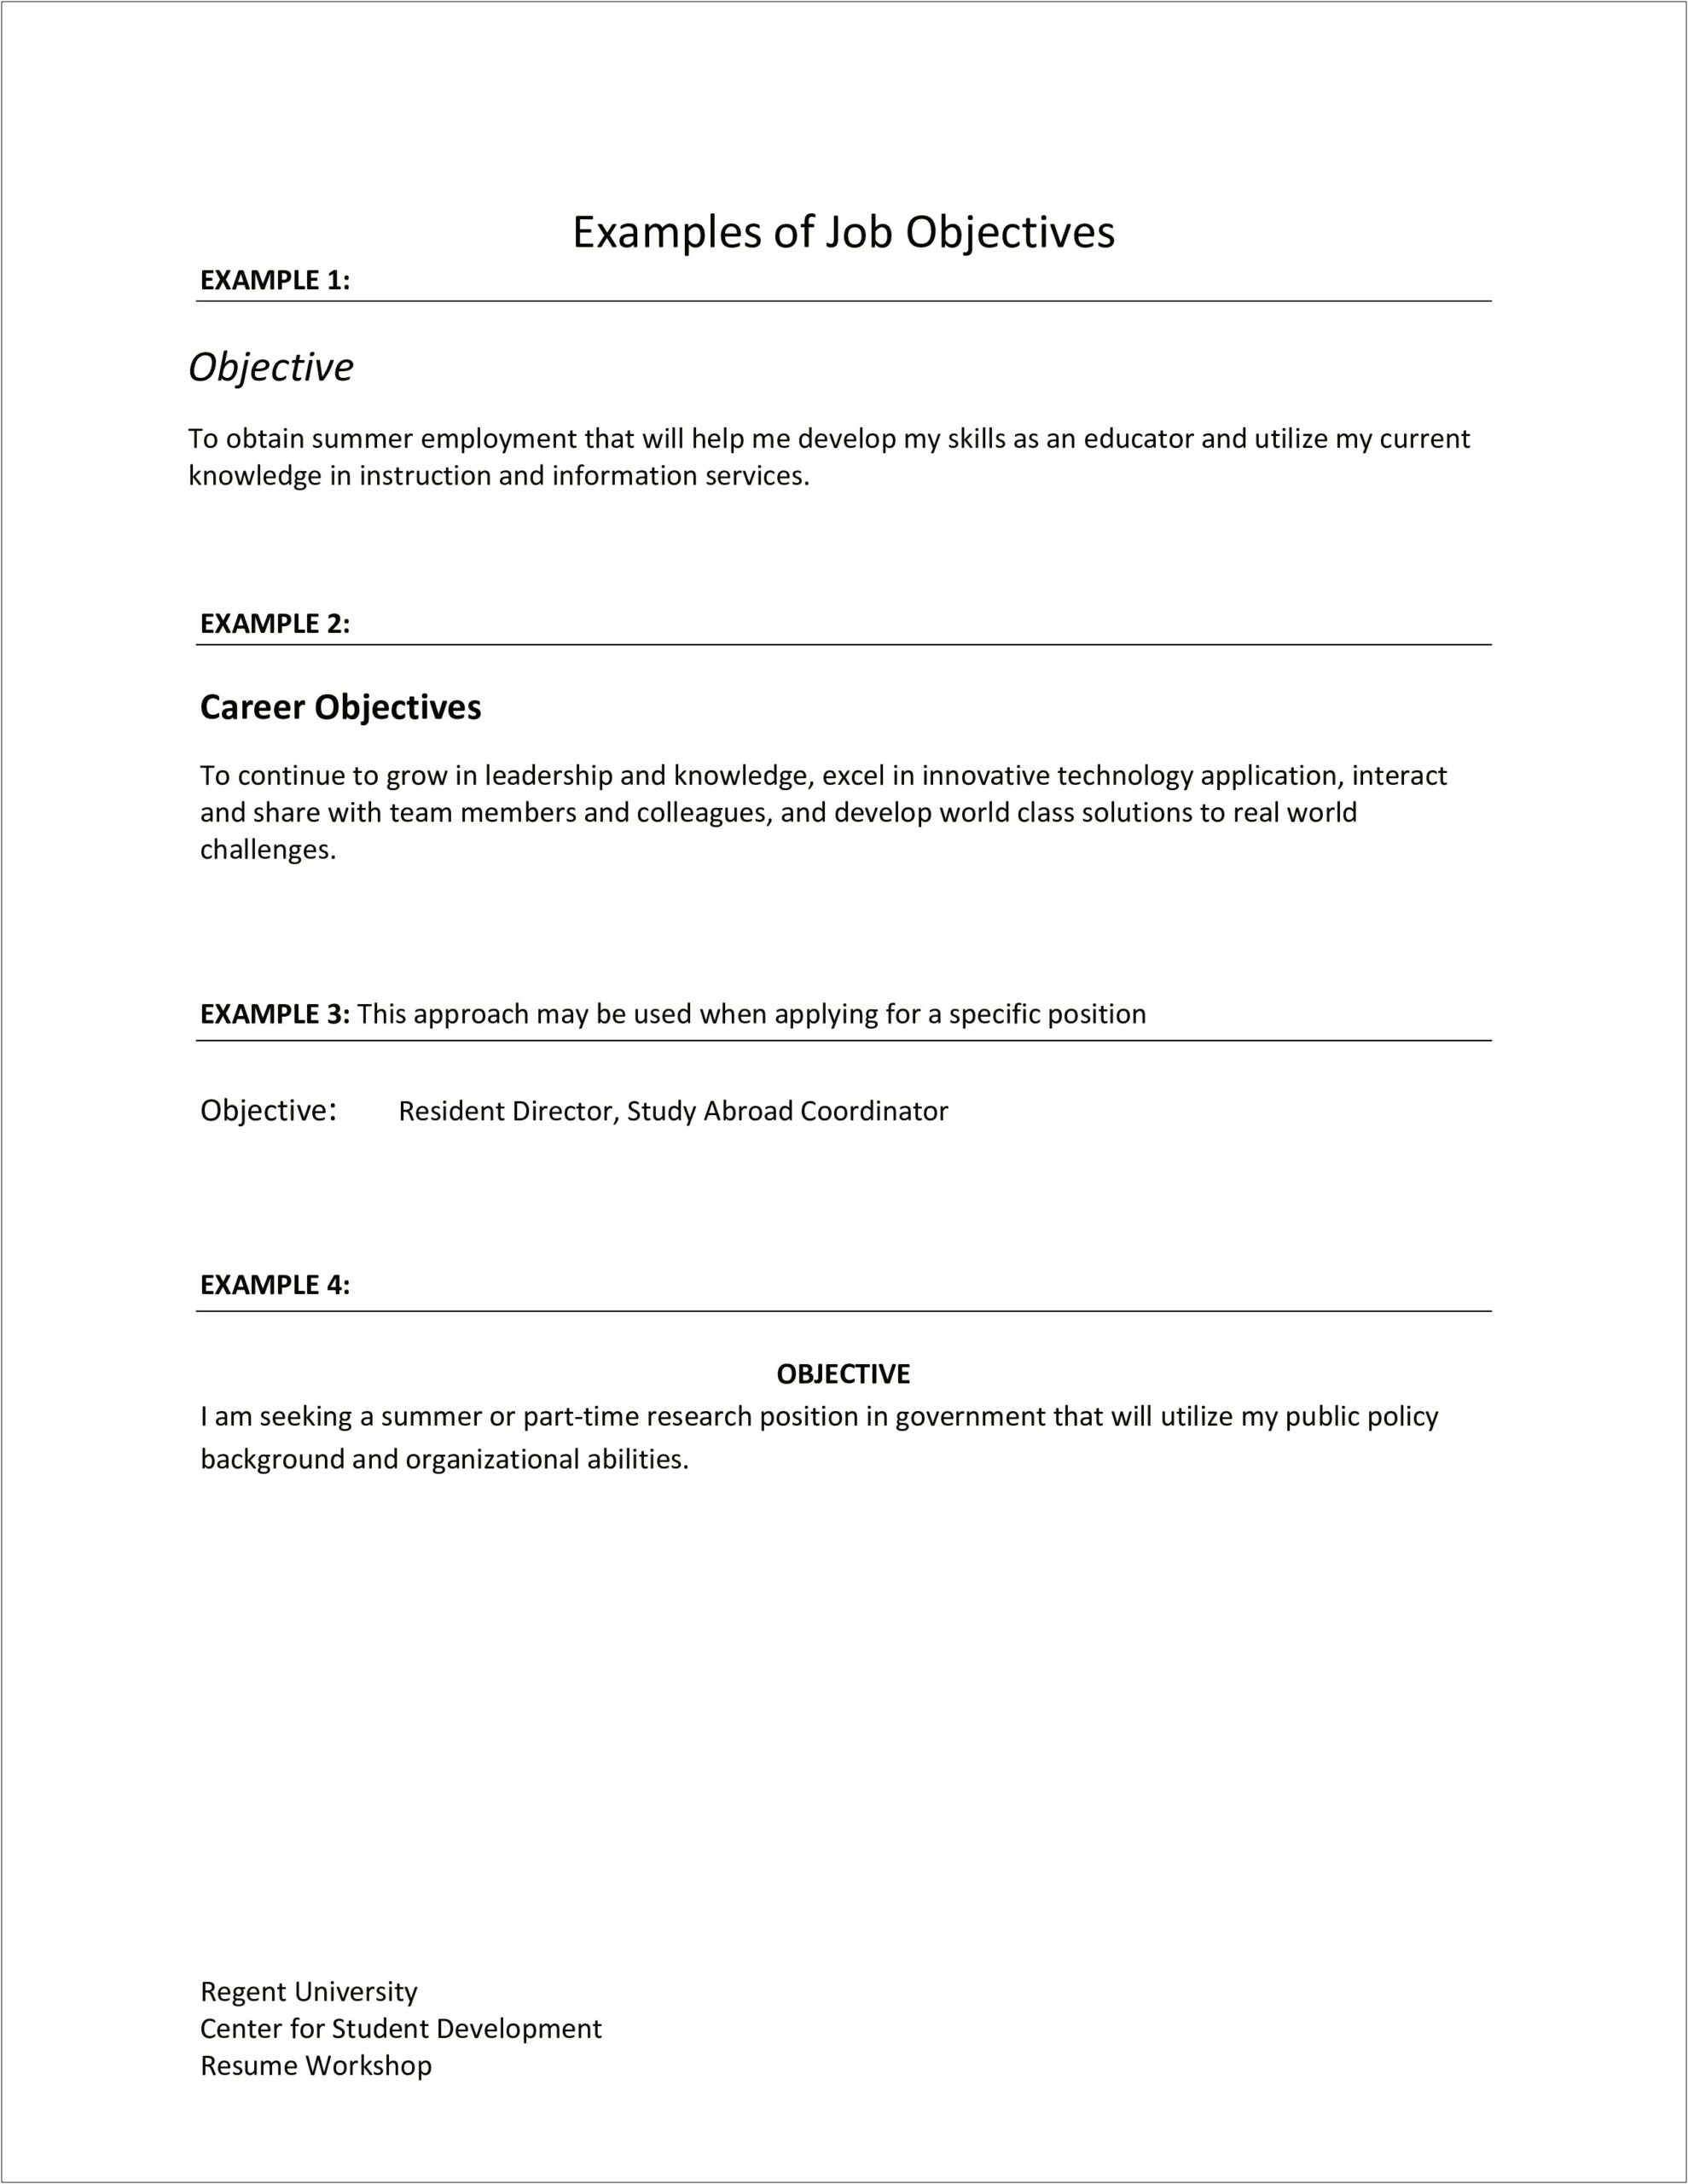 Resume Objectives For Government Jjob